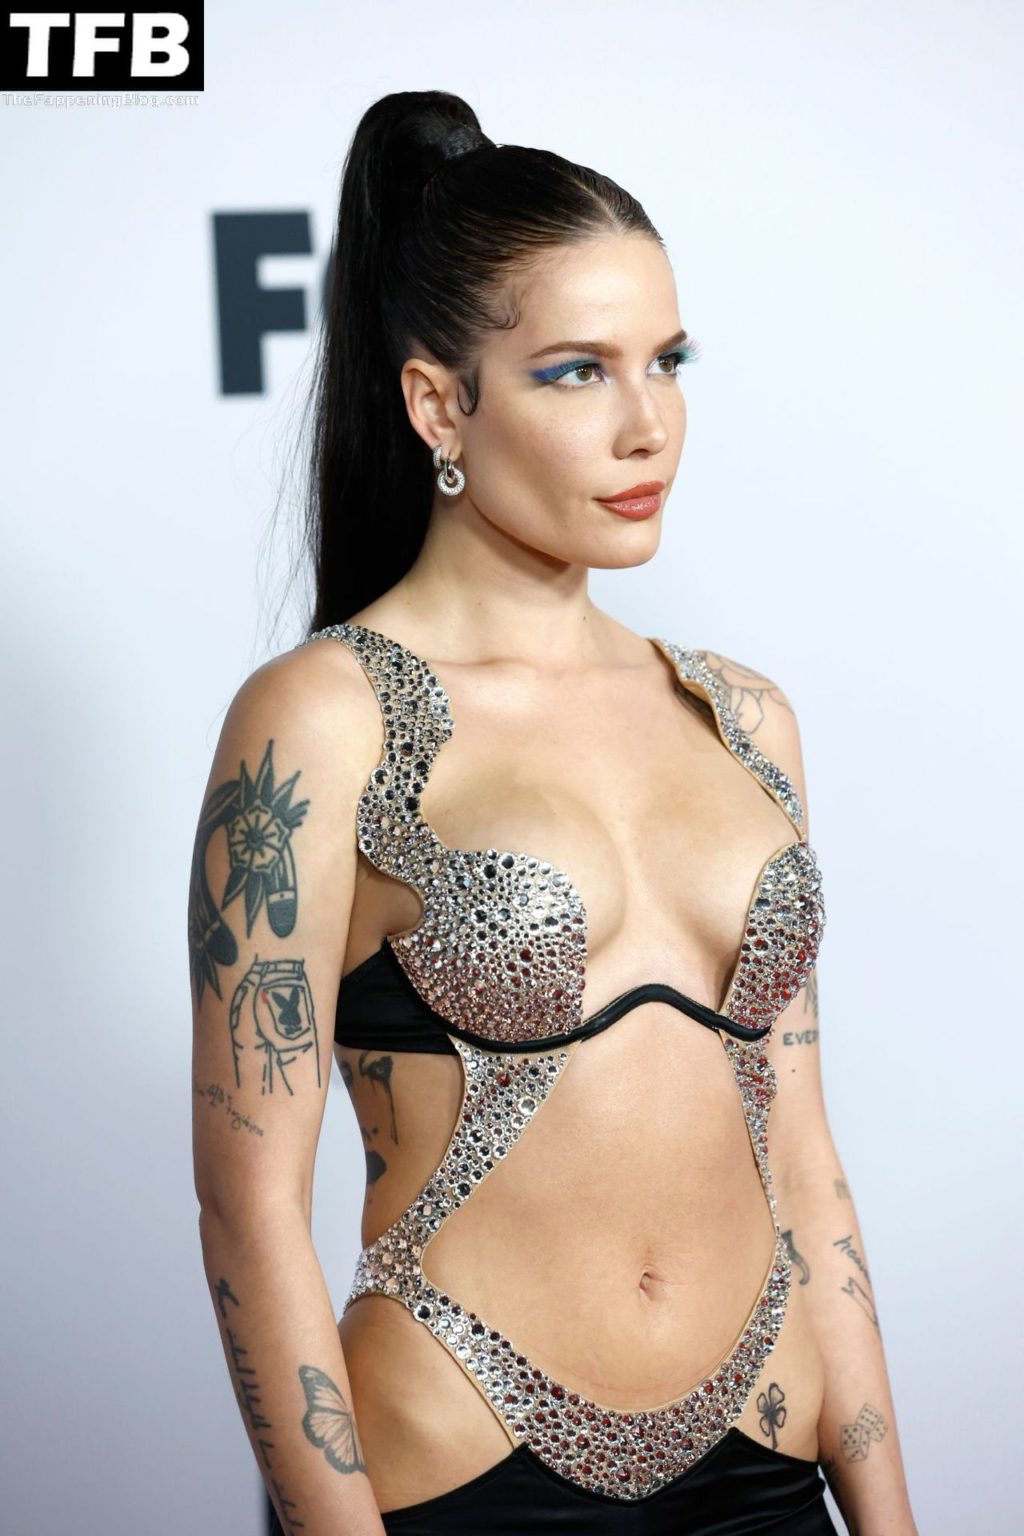 Halsey Flaunts Her Sexy Tits at the iHeartRadio Music Awards (65 Photos)